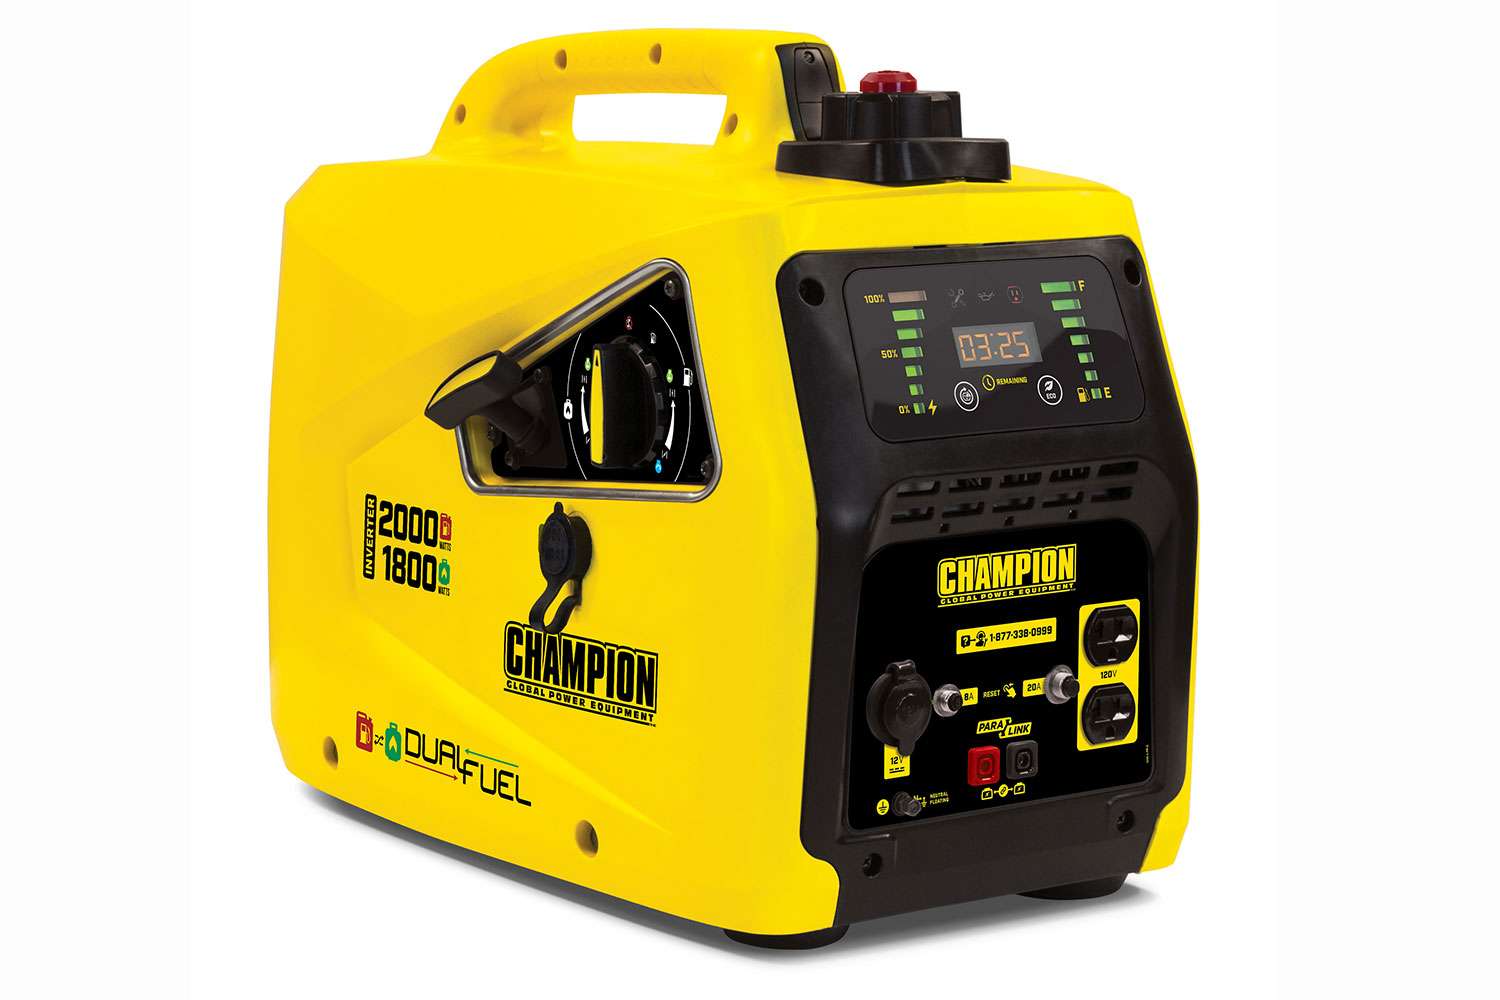 <p><b>Champion 2000-Watt Dual Fuel Inverter Generator</b></p>
This Champion Power Equipment inverter generator is ideal for camping, tailgating, powering items around the RV or providing backup for a few basics. This unit is not recommended for emergency home backup. It can be operated on either gasoline or propane. The EZ Start Dial takes the confusion out of starting an engine, plus it allows you to switch fuels with a quick turn of the dial. Cold Start Technology ensures a quick start in cold weather. The digital power panel includes a low oil level indicator and monitors power output, fuel level, total run time and fuel life, receptacle status, economy mode and maintenance. Champion minimizes the hassle of refueling in the dark with Fuel Fill Assist LED, a push-button LED built right into the handle to illuminate the gasoline fill area. Using gasoline, the 80cc Champion engine produces 2000 starting watts and 1600 running watts, and will run up to 11 hours at 25% load when the 1.1 gallon tank of gasoline is full. Using propane, it produces 1800 starting watts and 1440 running watts.  Including two 120V 20A household outlets, a 12V DC outlet, and a dual port USB adapter, this inverter operates at 53 dBA from 23 feet â about the same noise level as a dishwasher.<br>
<p><b>MSRP: $633.60</b></p>
<a href=